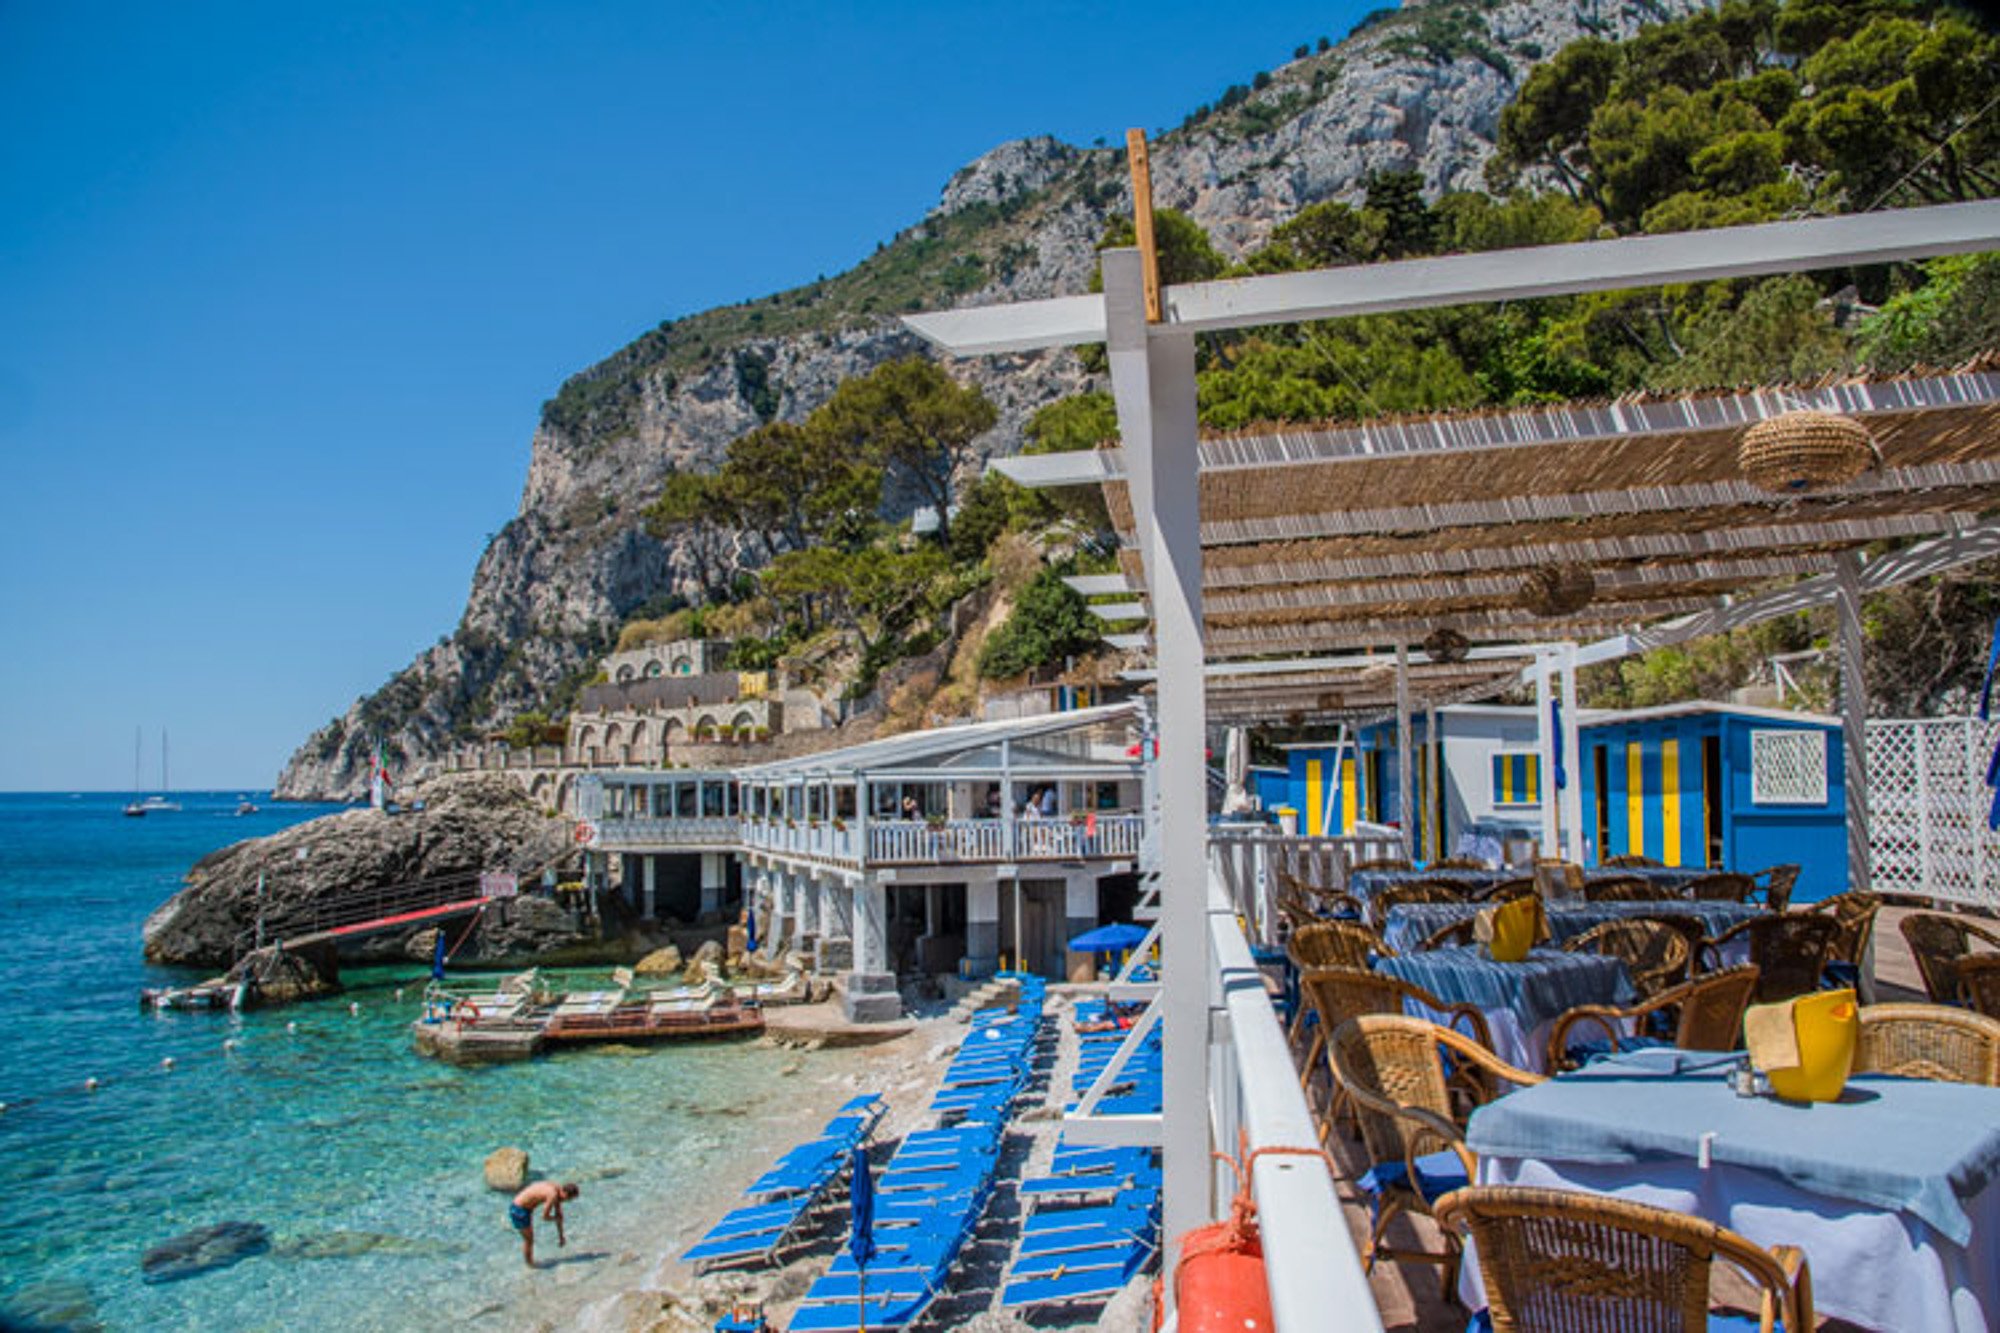 Torre Saracena Beach Club &amp; Restaurant is home to one of the best beaches in Capri and the best beach clubs in Capri